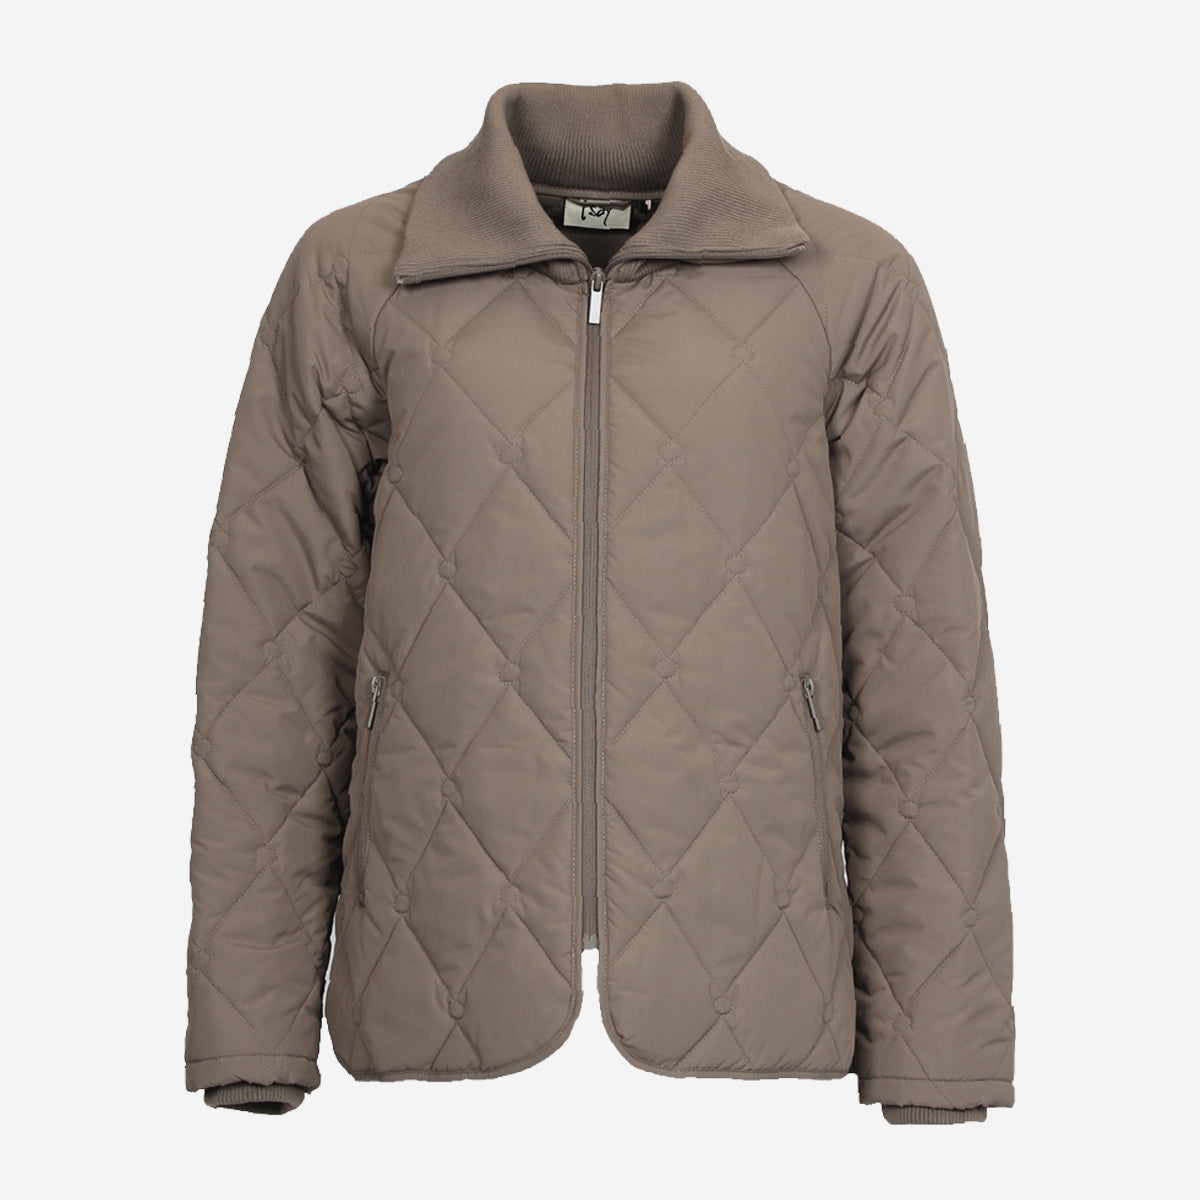 DIDDI QUILTED JACKET